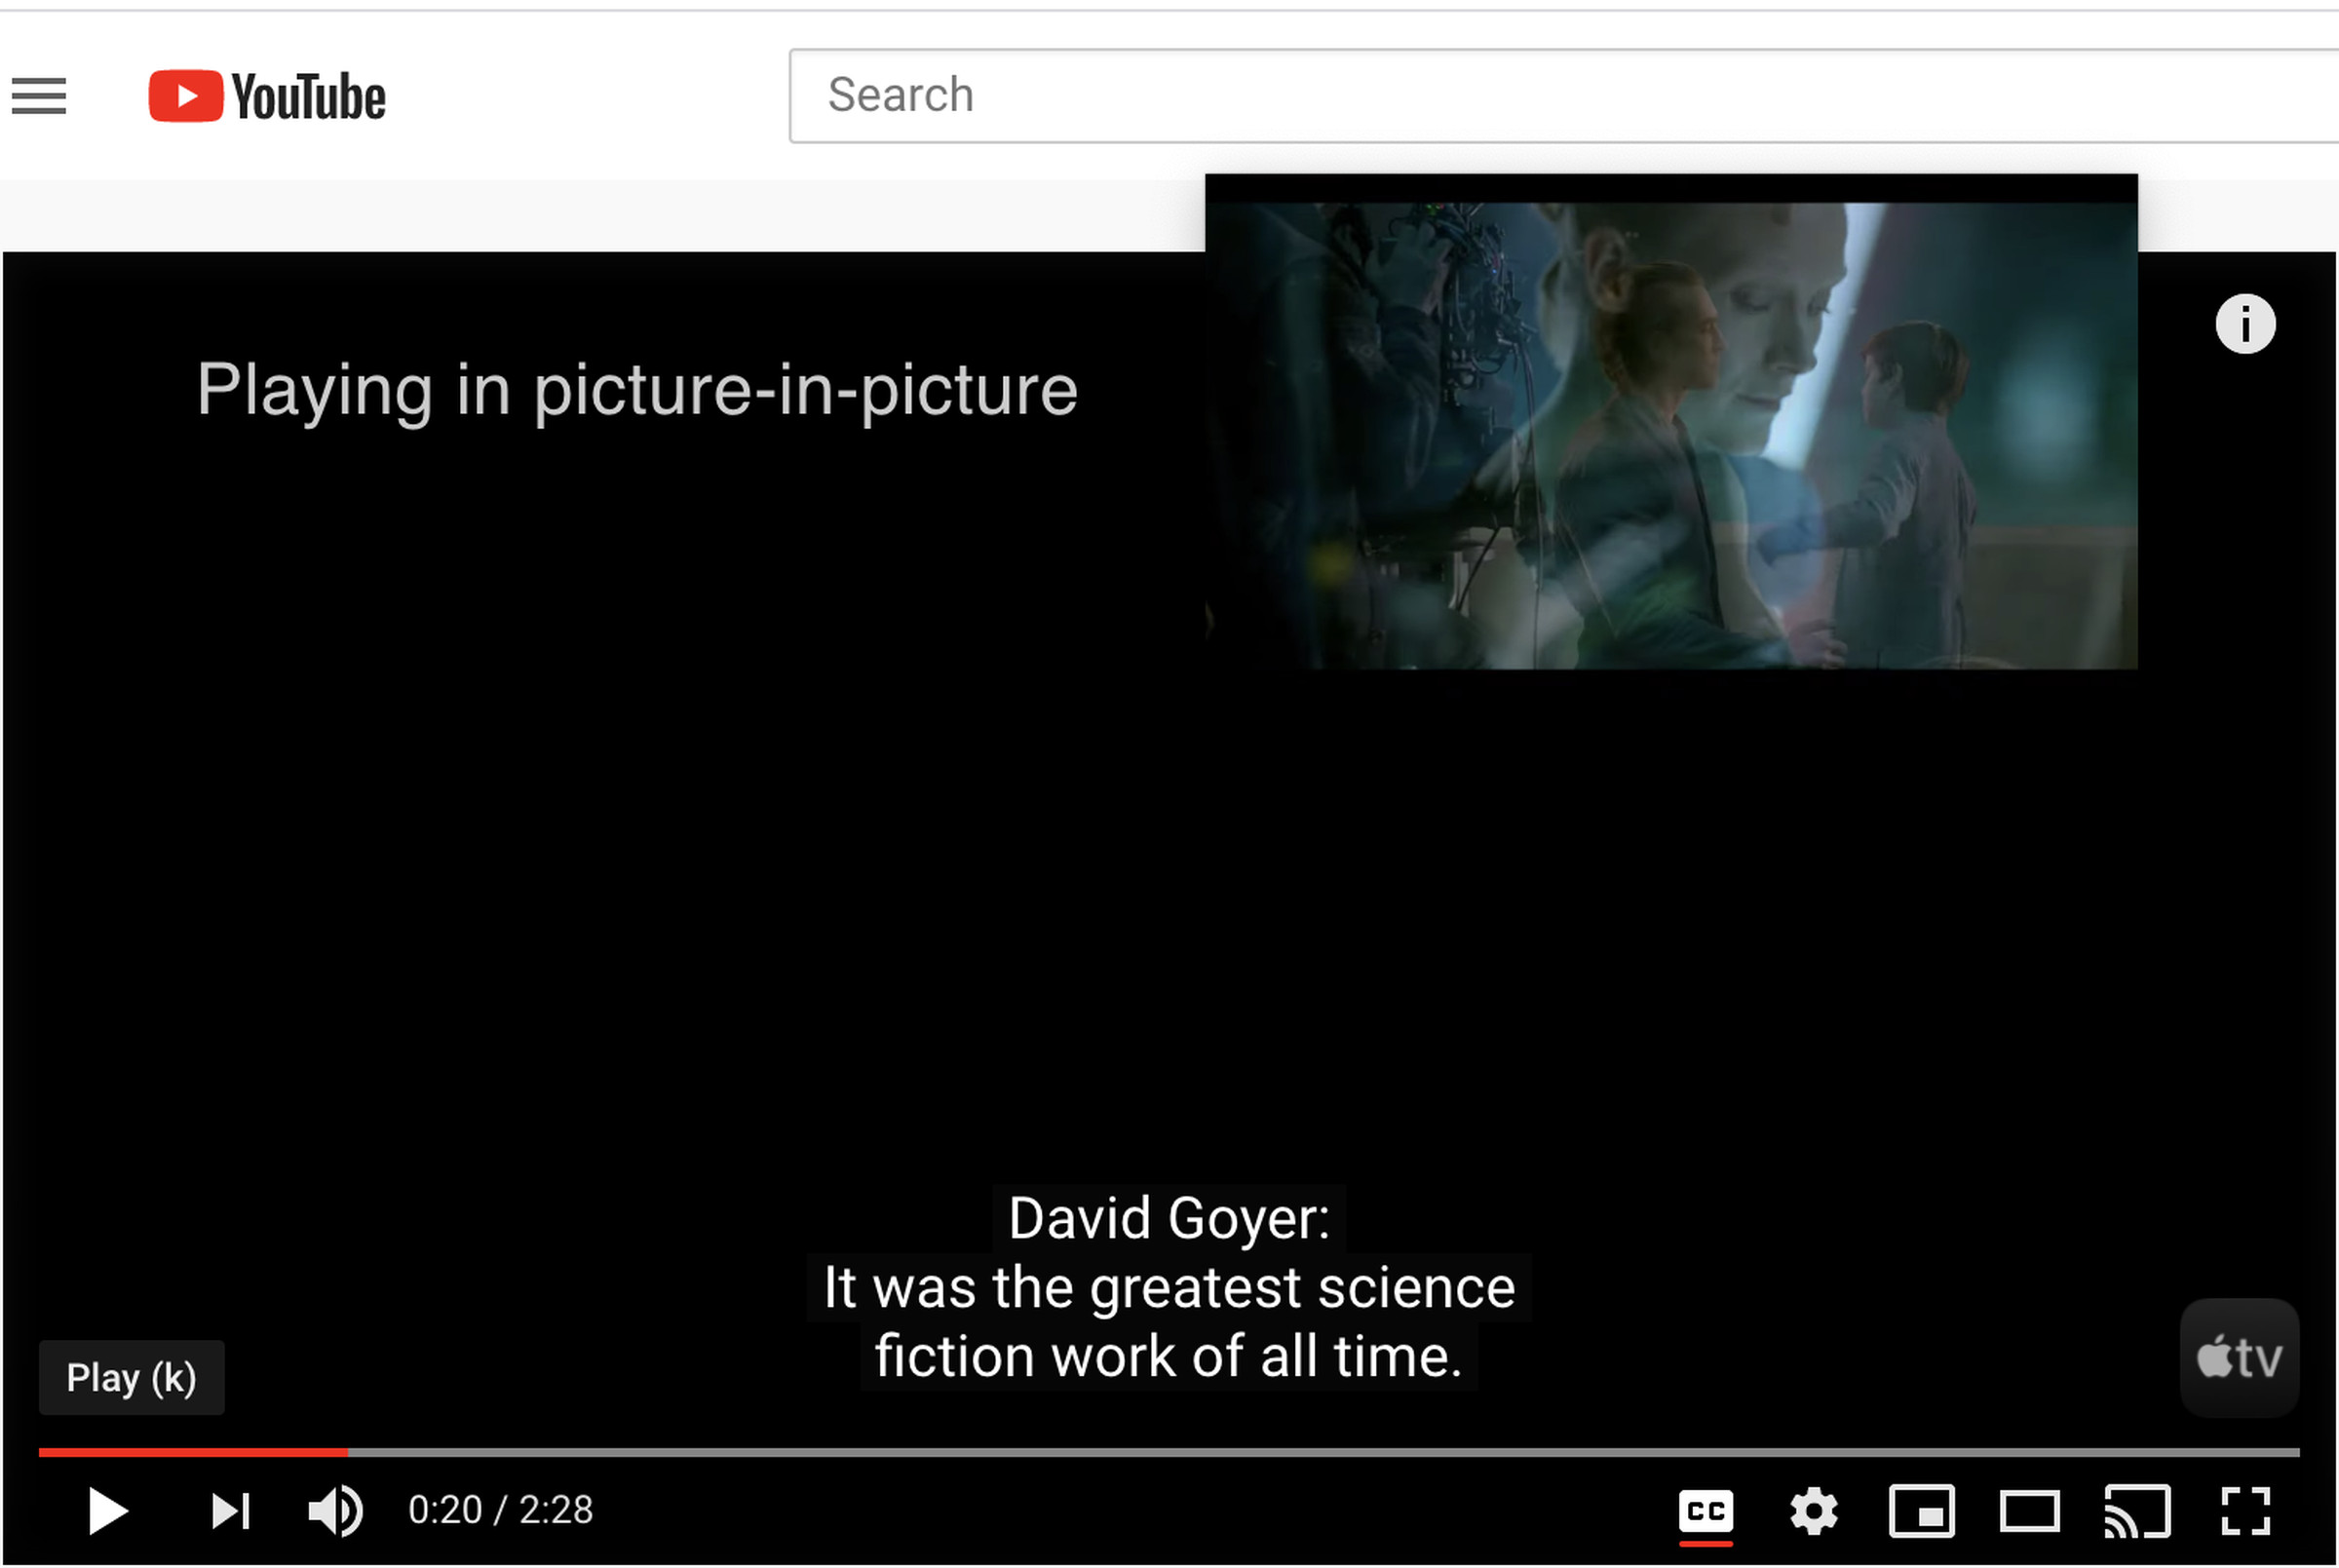 You can move the PiP image anywhere in your screen; however, captions won’t move with it.